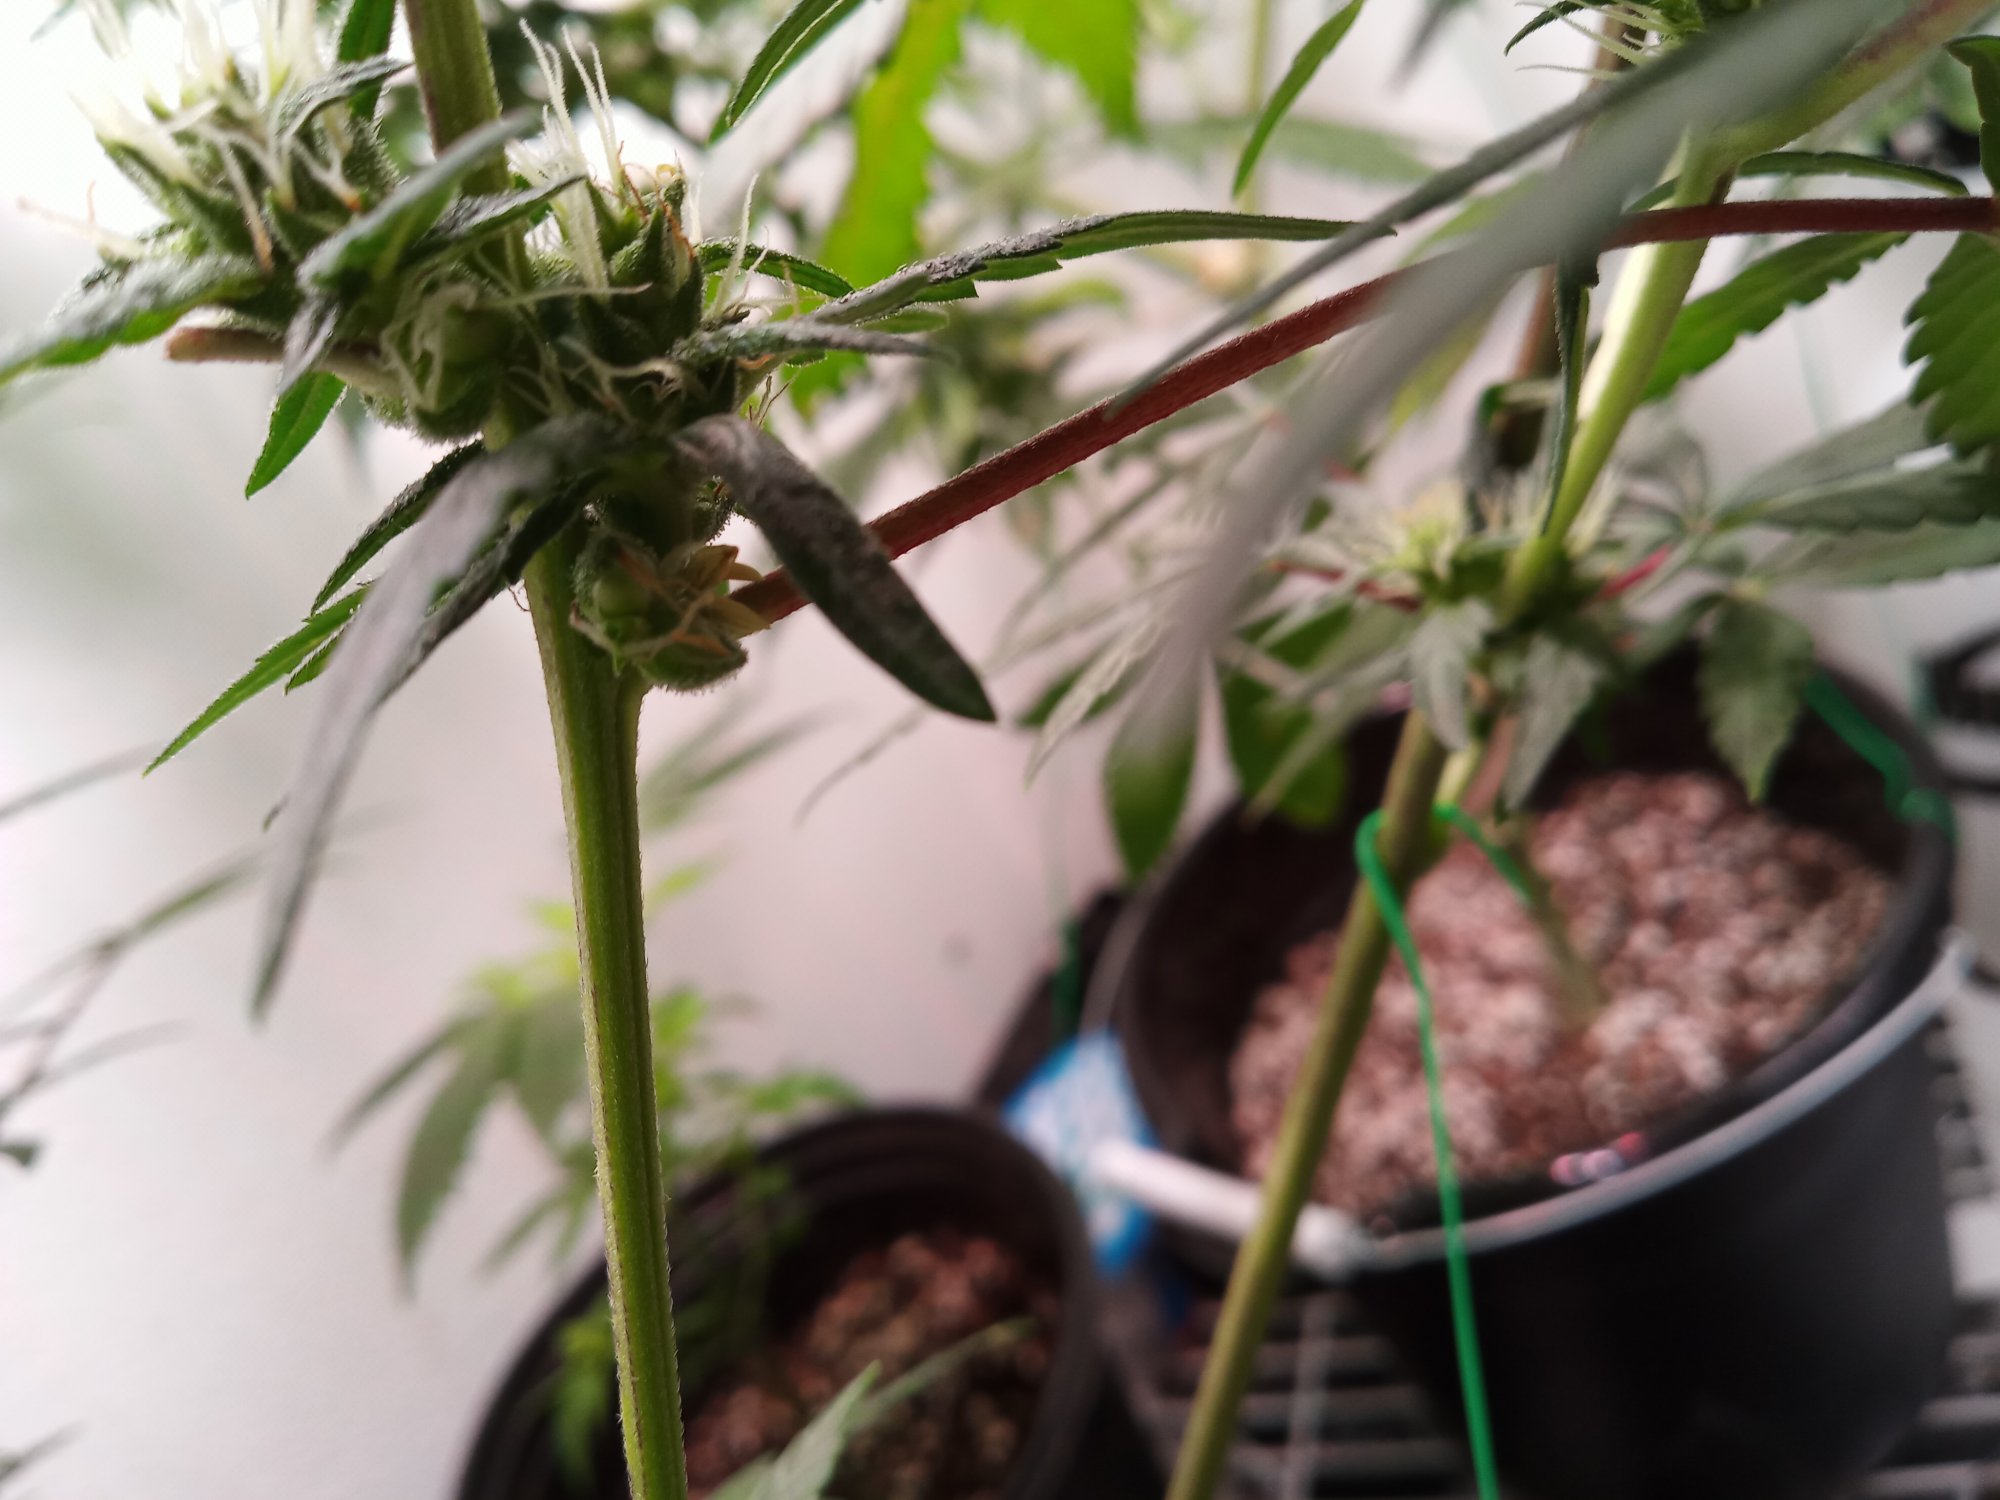 Weird structures on my plant in flower 4